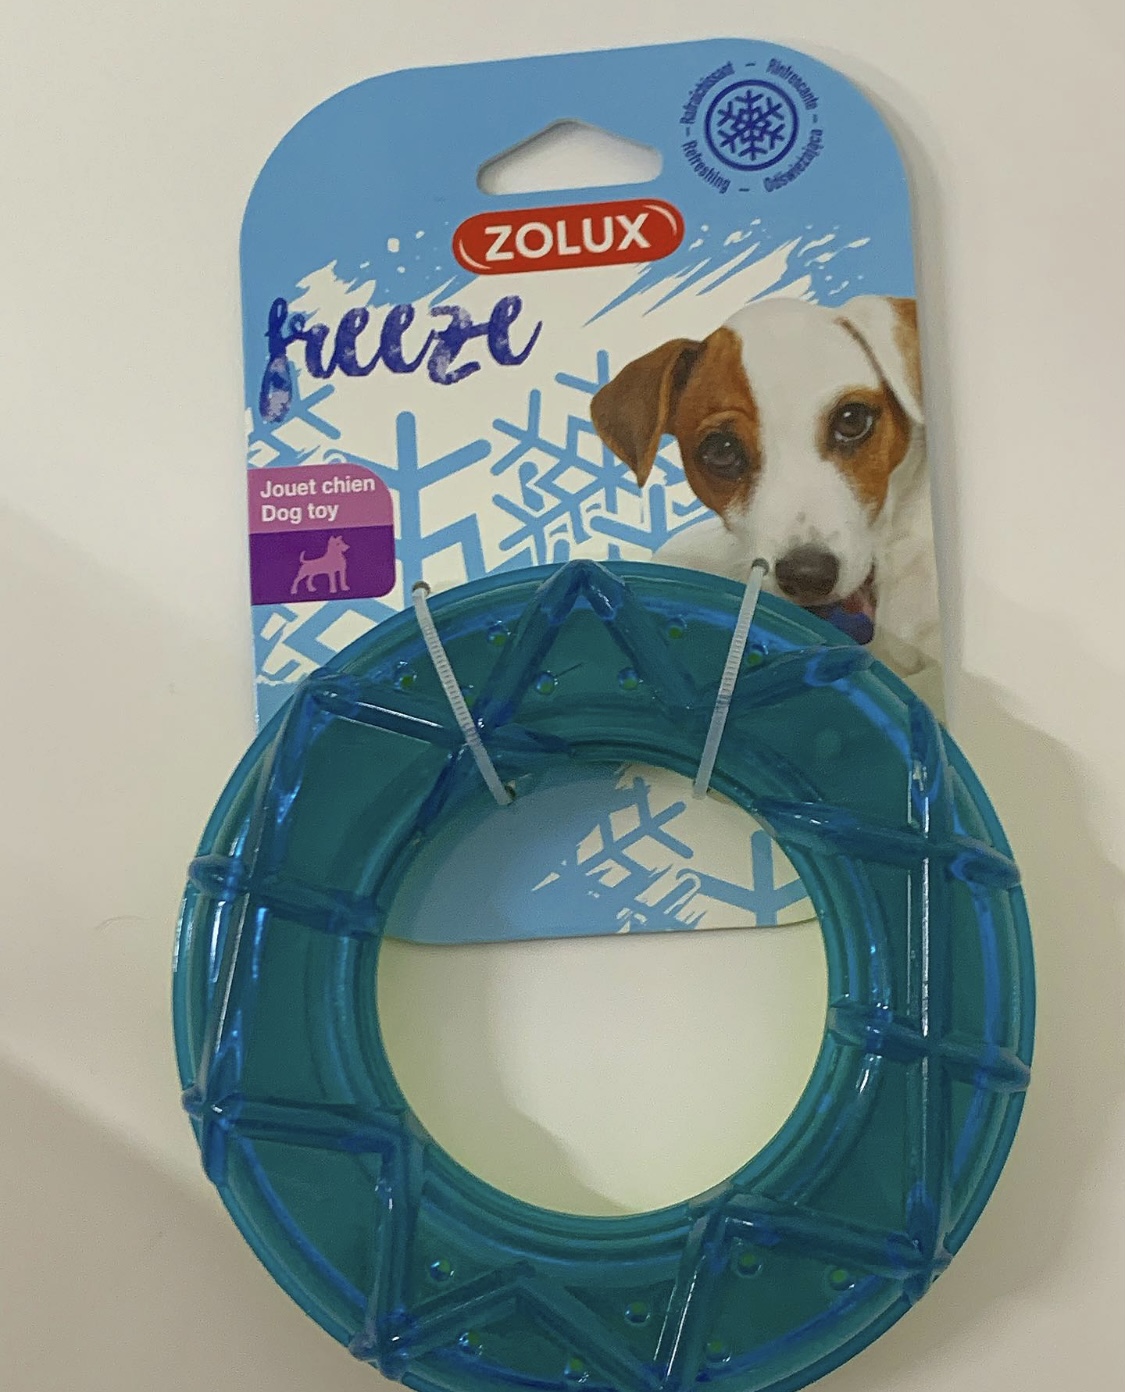 Giocattolo Zolux ring toy